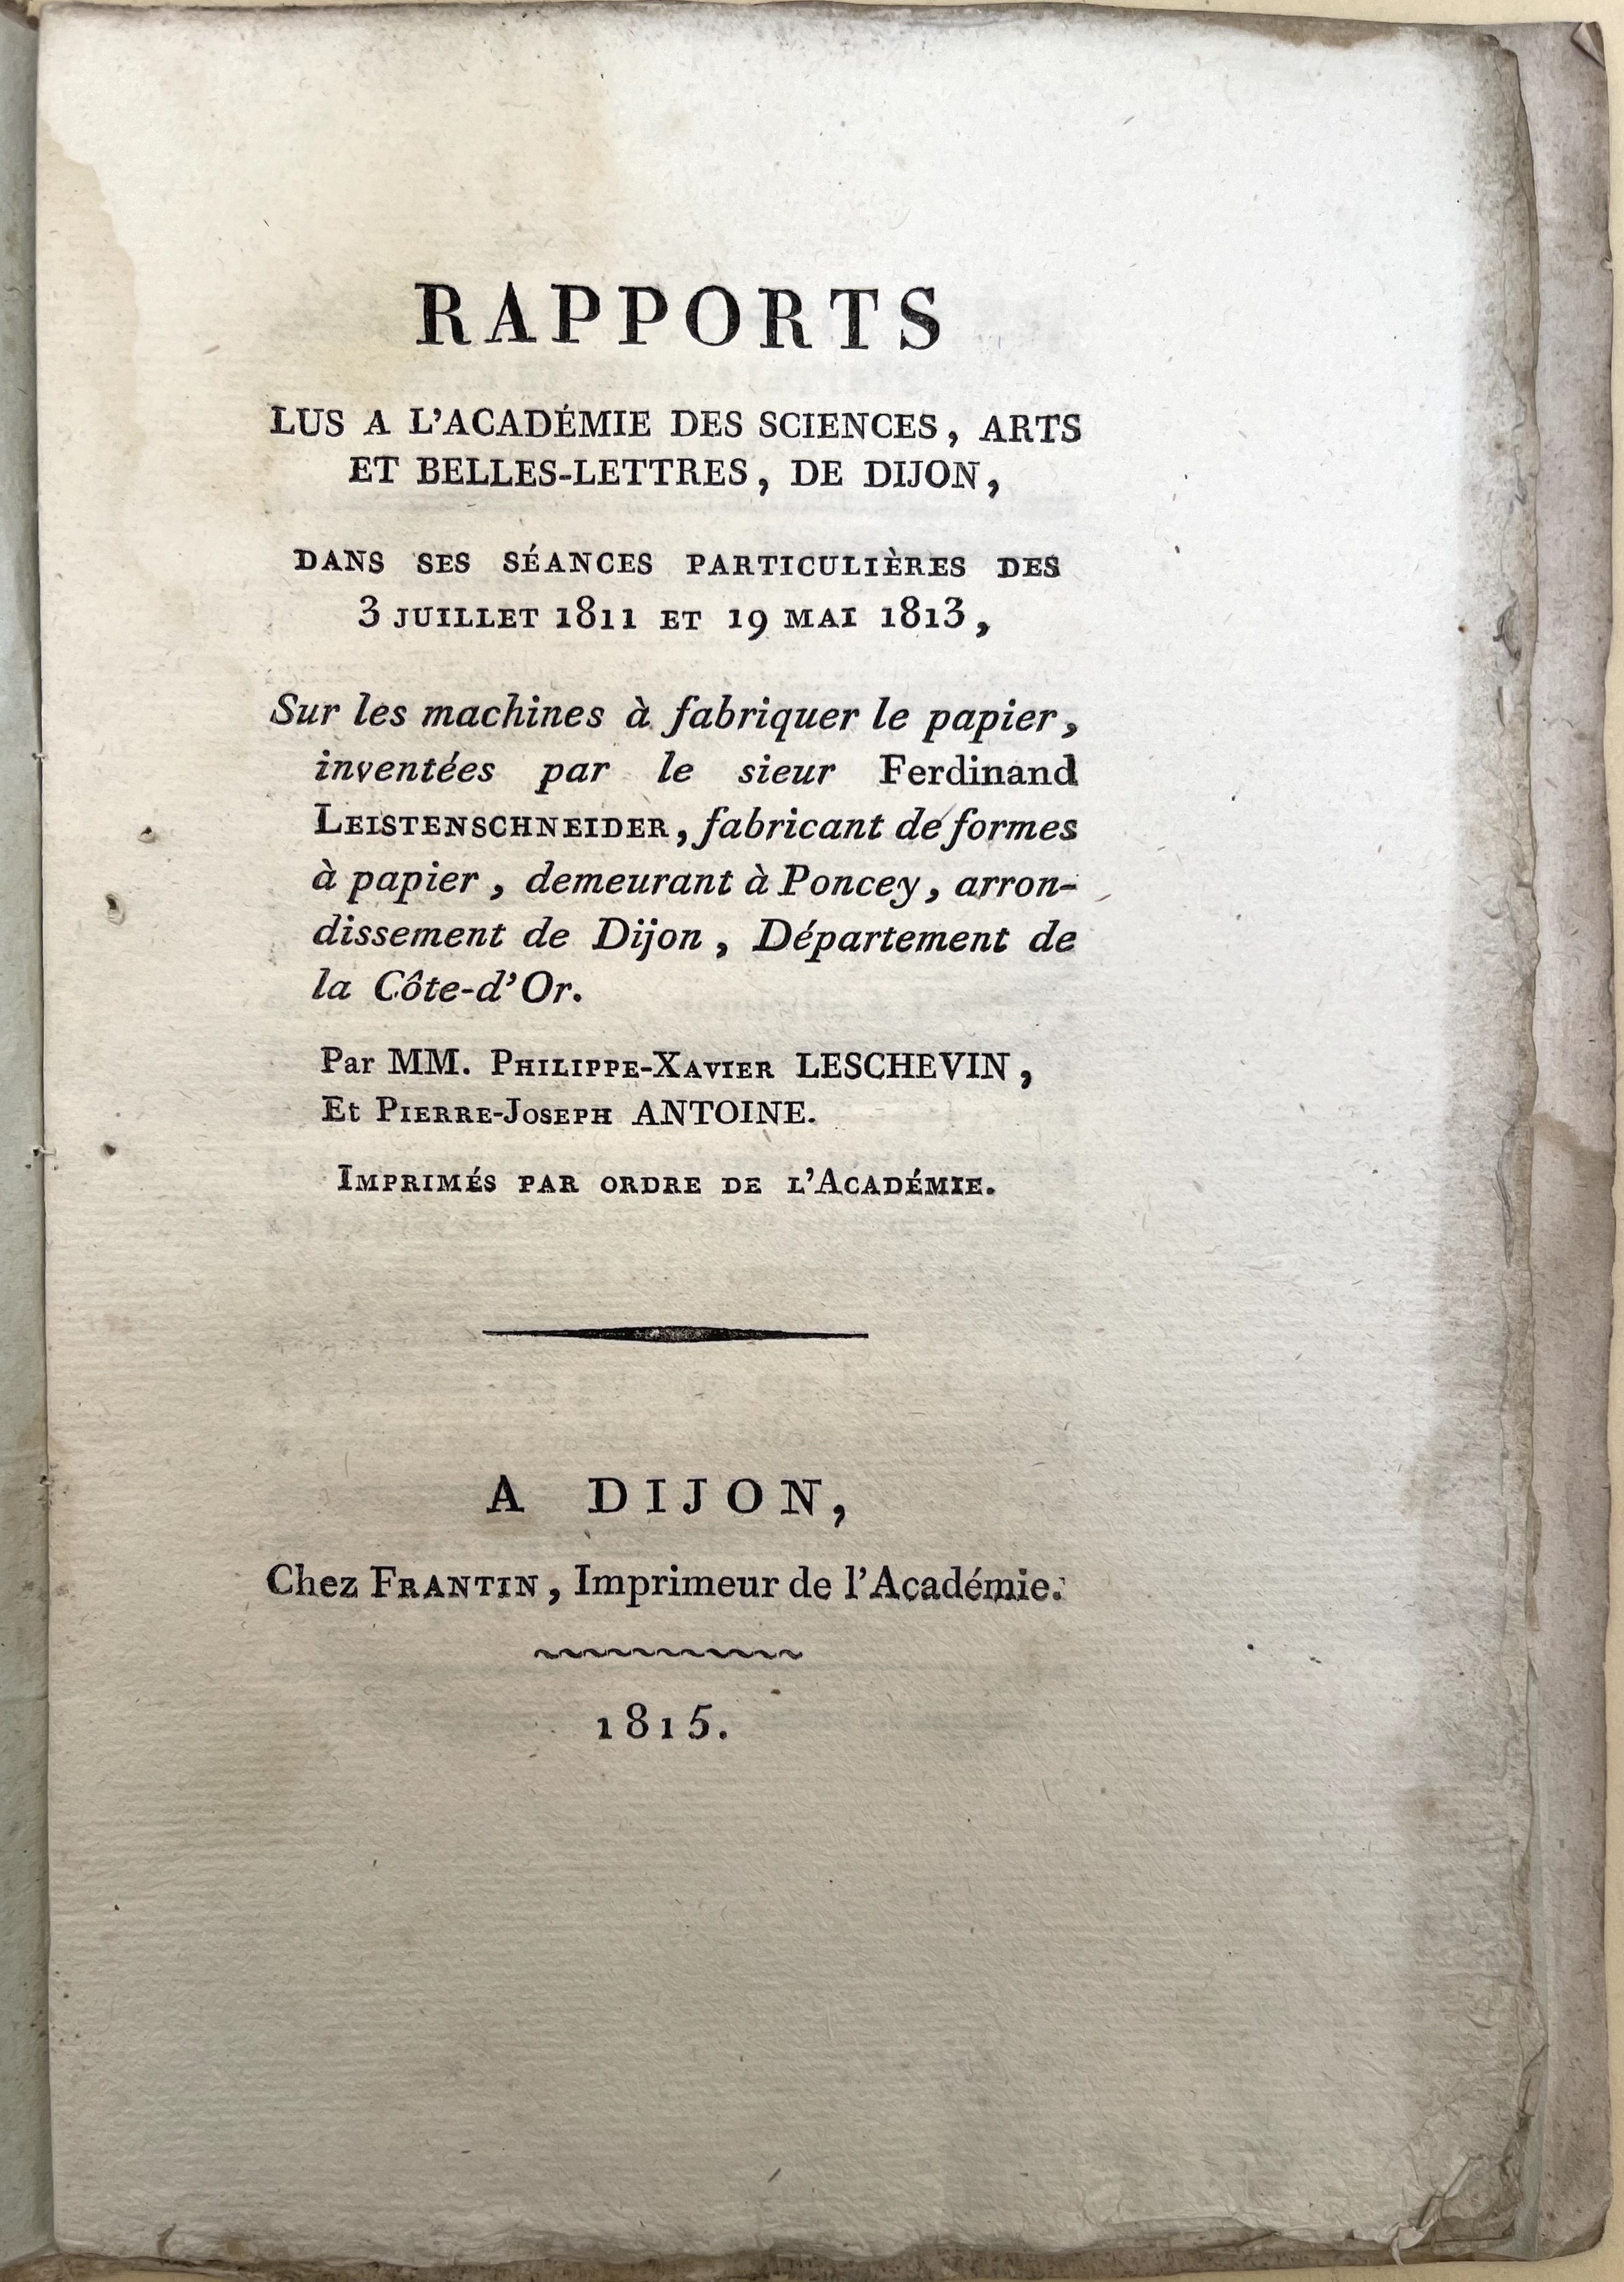 Probably the first separate publication published in France on papermaking by machine, and possibly the first separate publication on the topic published anywhere.